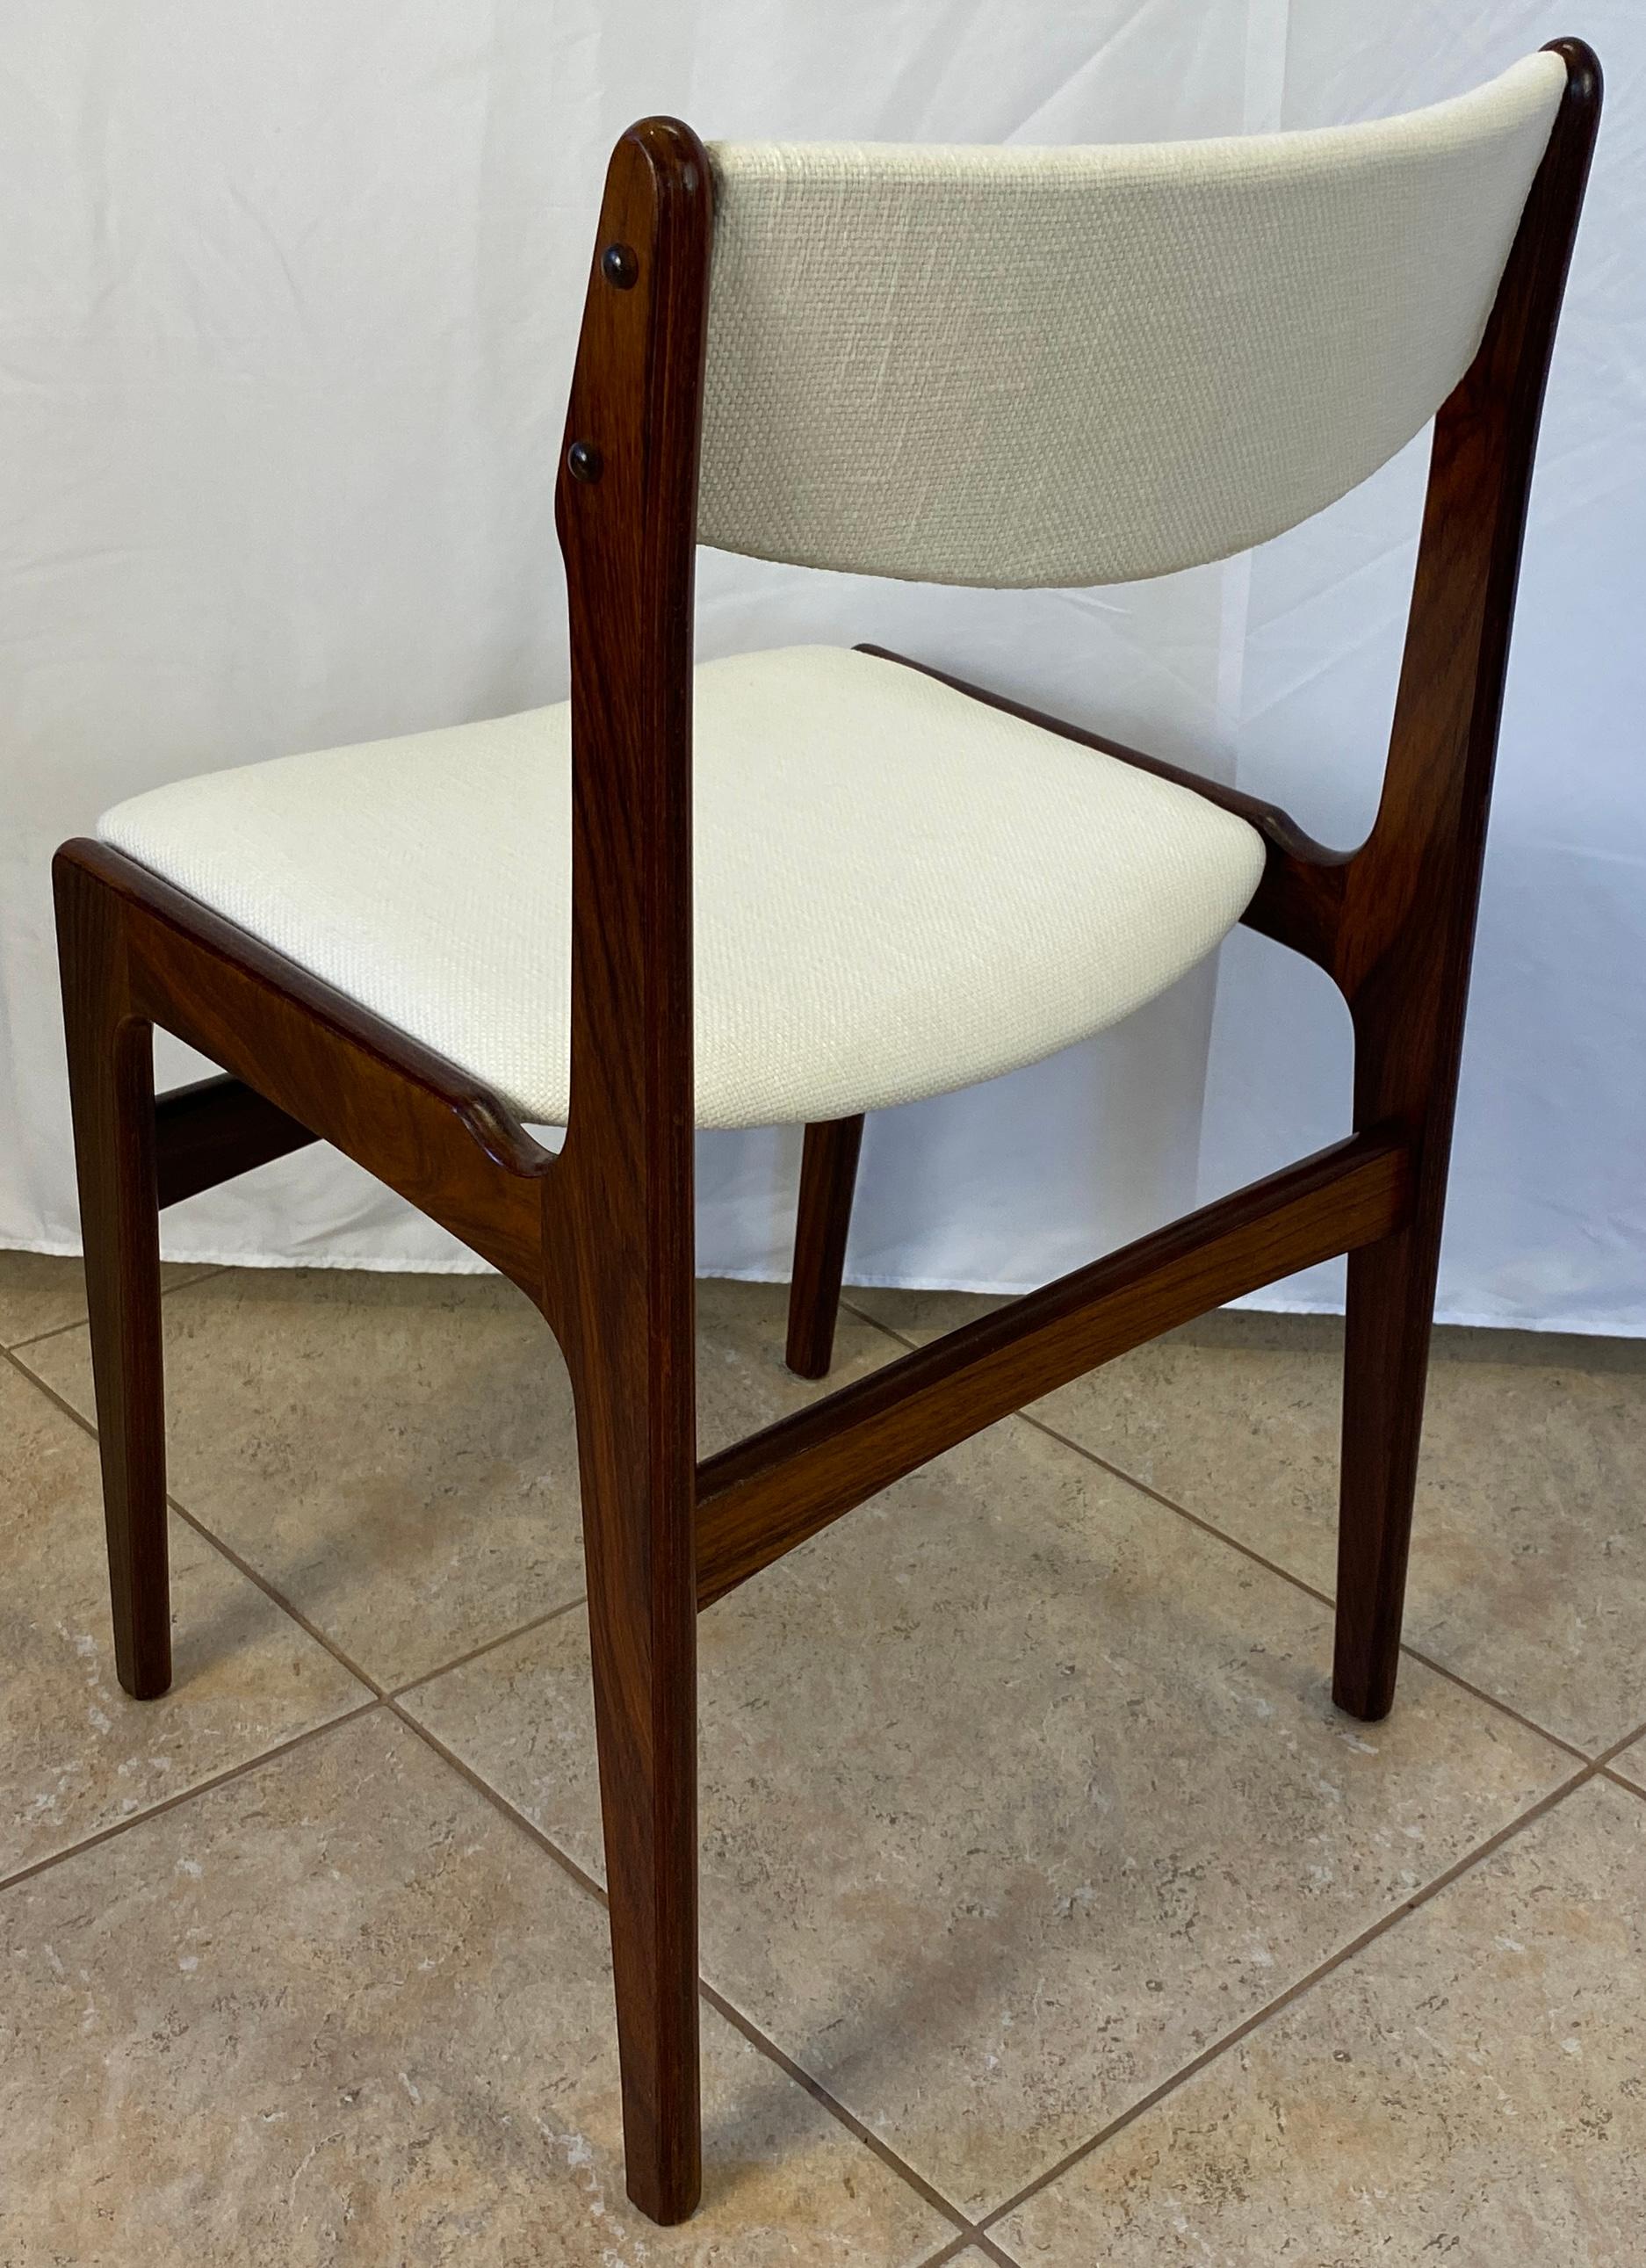 Beautiful set of four modern Danish style dining chairs.  This fine quality set of 4 modern dining chairs were made in Denmark from rosewood known for its elegance and durability. Expertly crafted. Extremely comfortable with new upholstery and